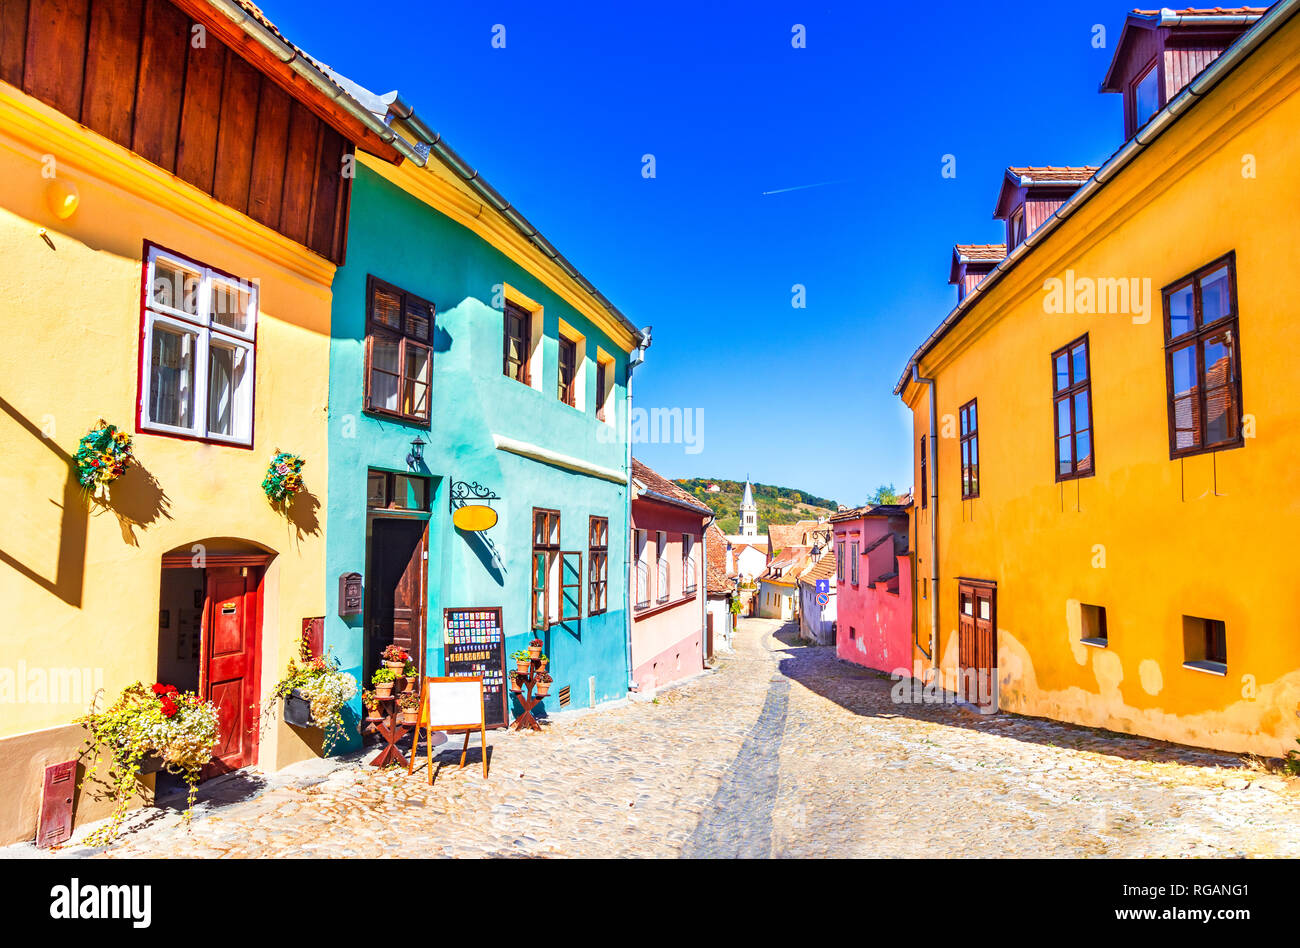 Sighisoara, Romania: Famous stone paved old streets with colorful houses in the medieval city-fortress Stock Photo